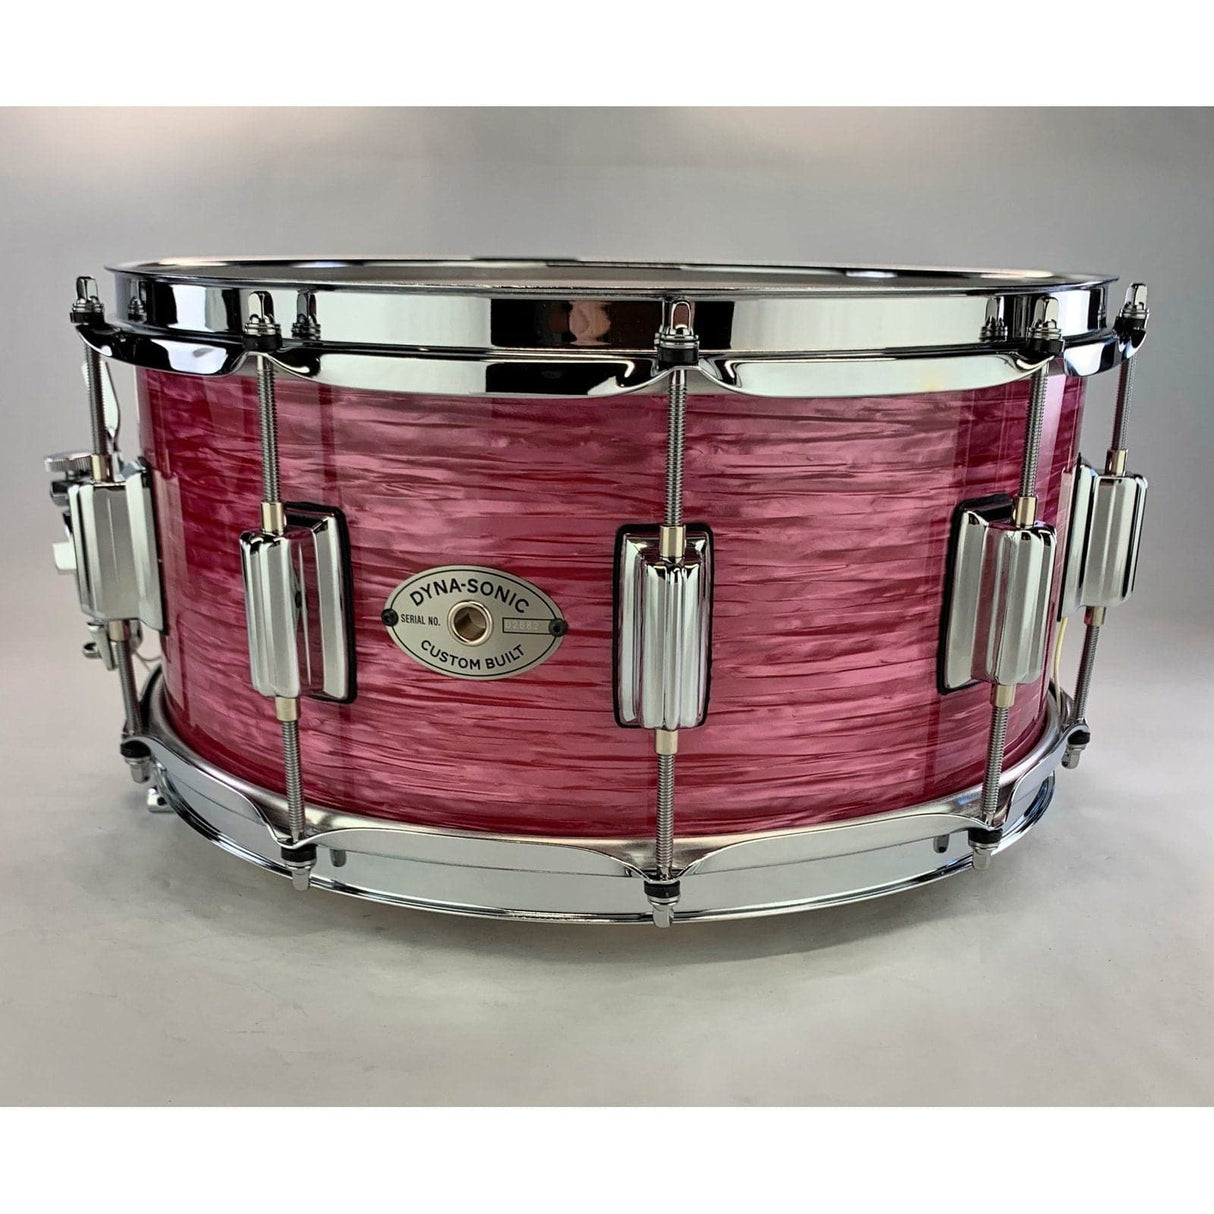 Rogers Dyna-sonic Wood Shell Snare Drum 14x6.5 Red Ripple Beavertail